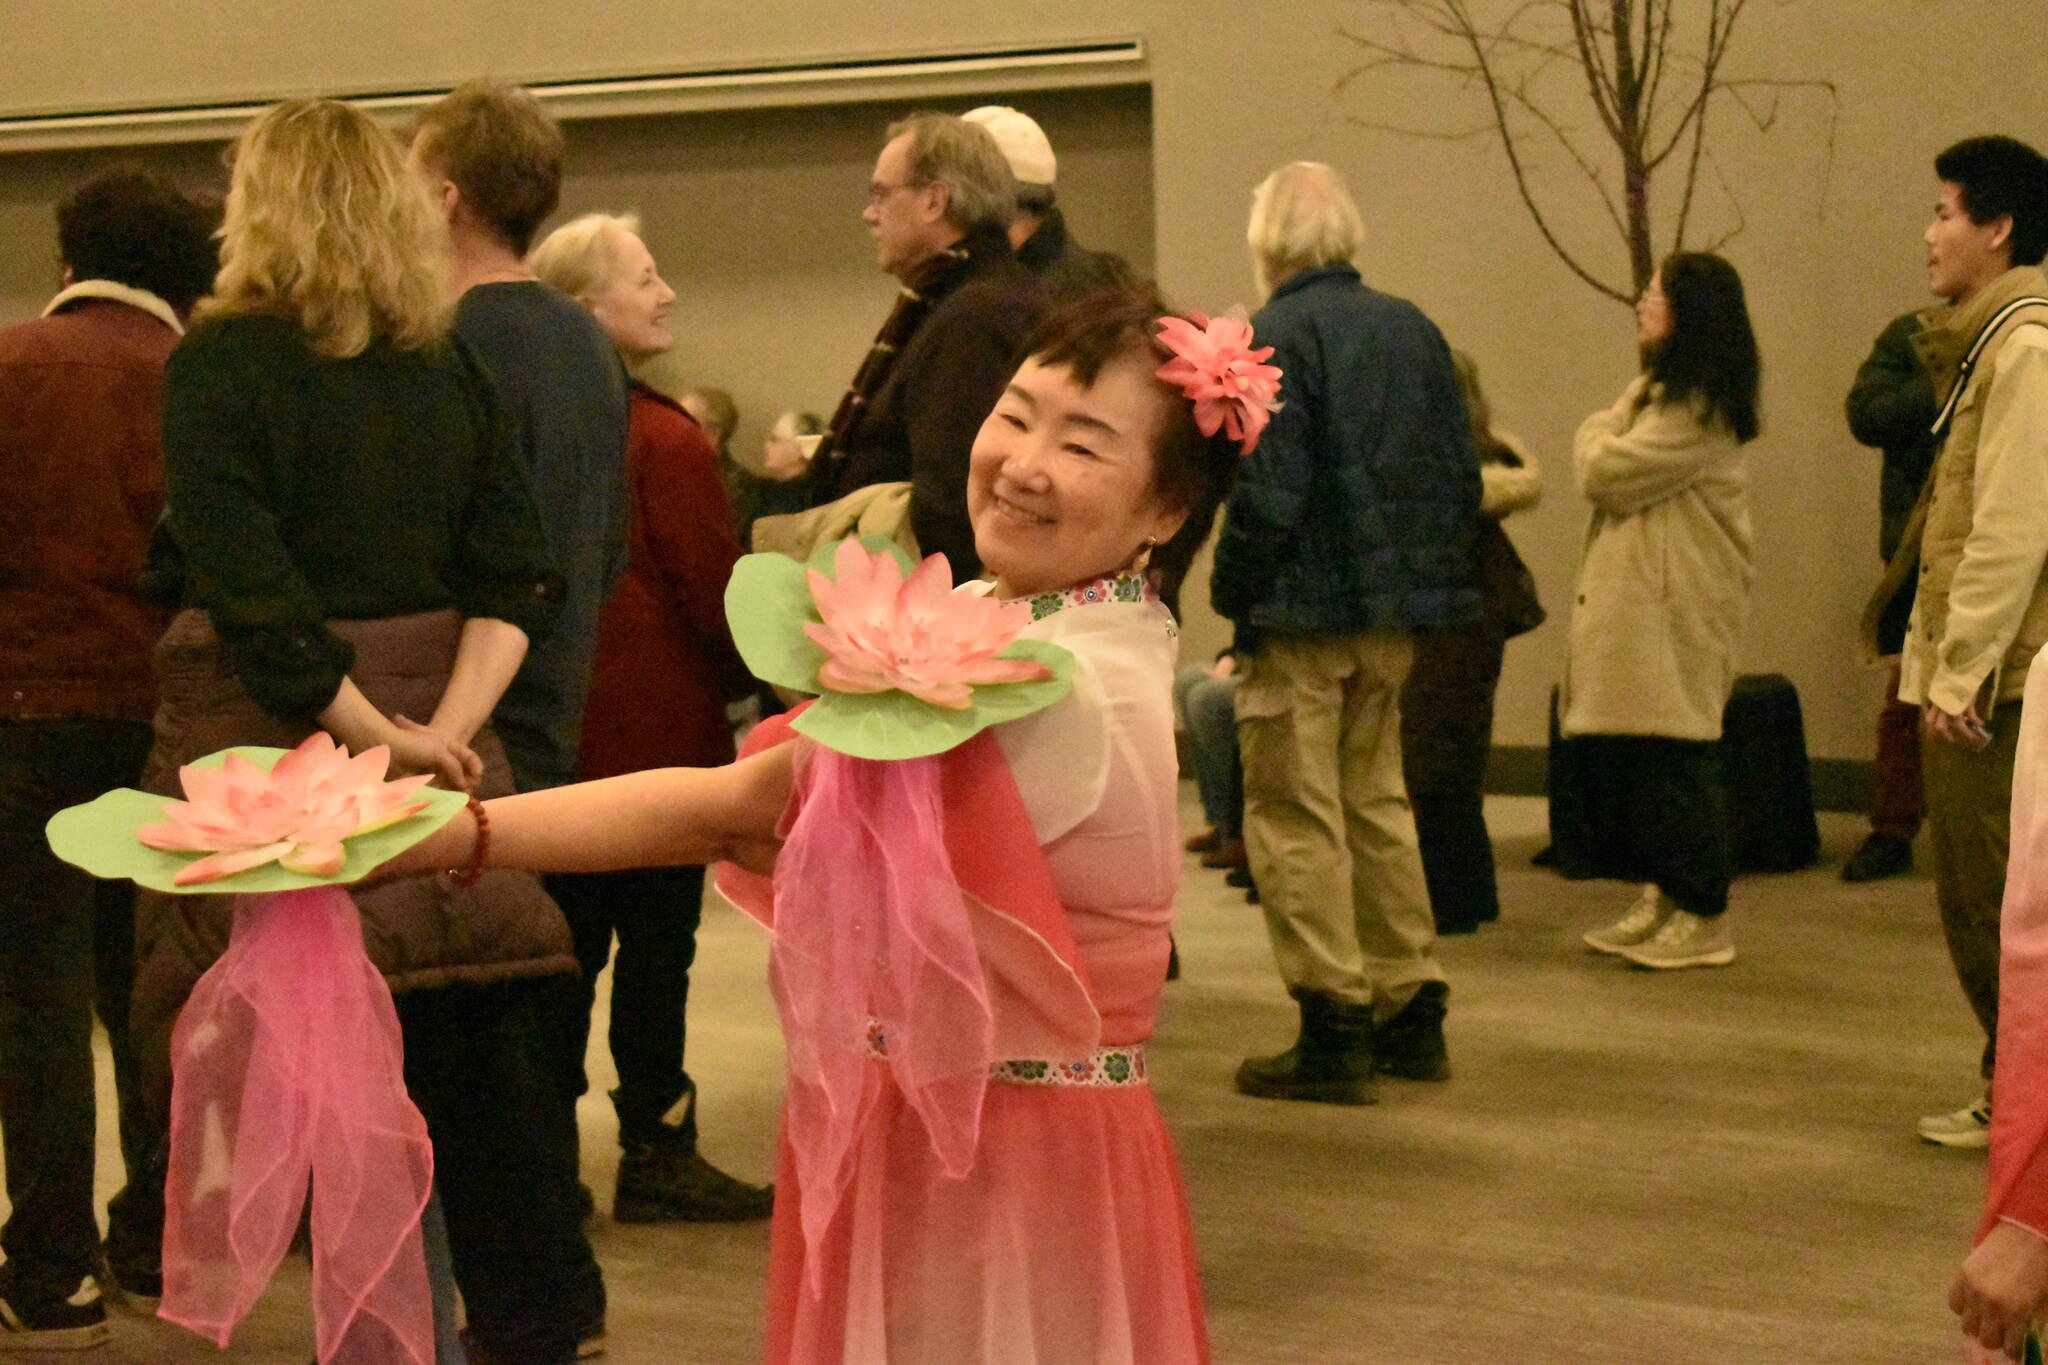 The OneWorld Festival in Penticton returned Saturday, Feb. 25, for a celebration of culture and diversity. (Logan Lockhart- Western News)